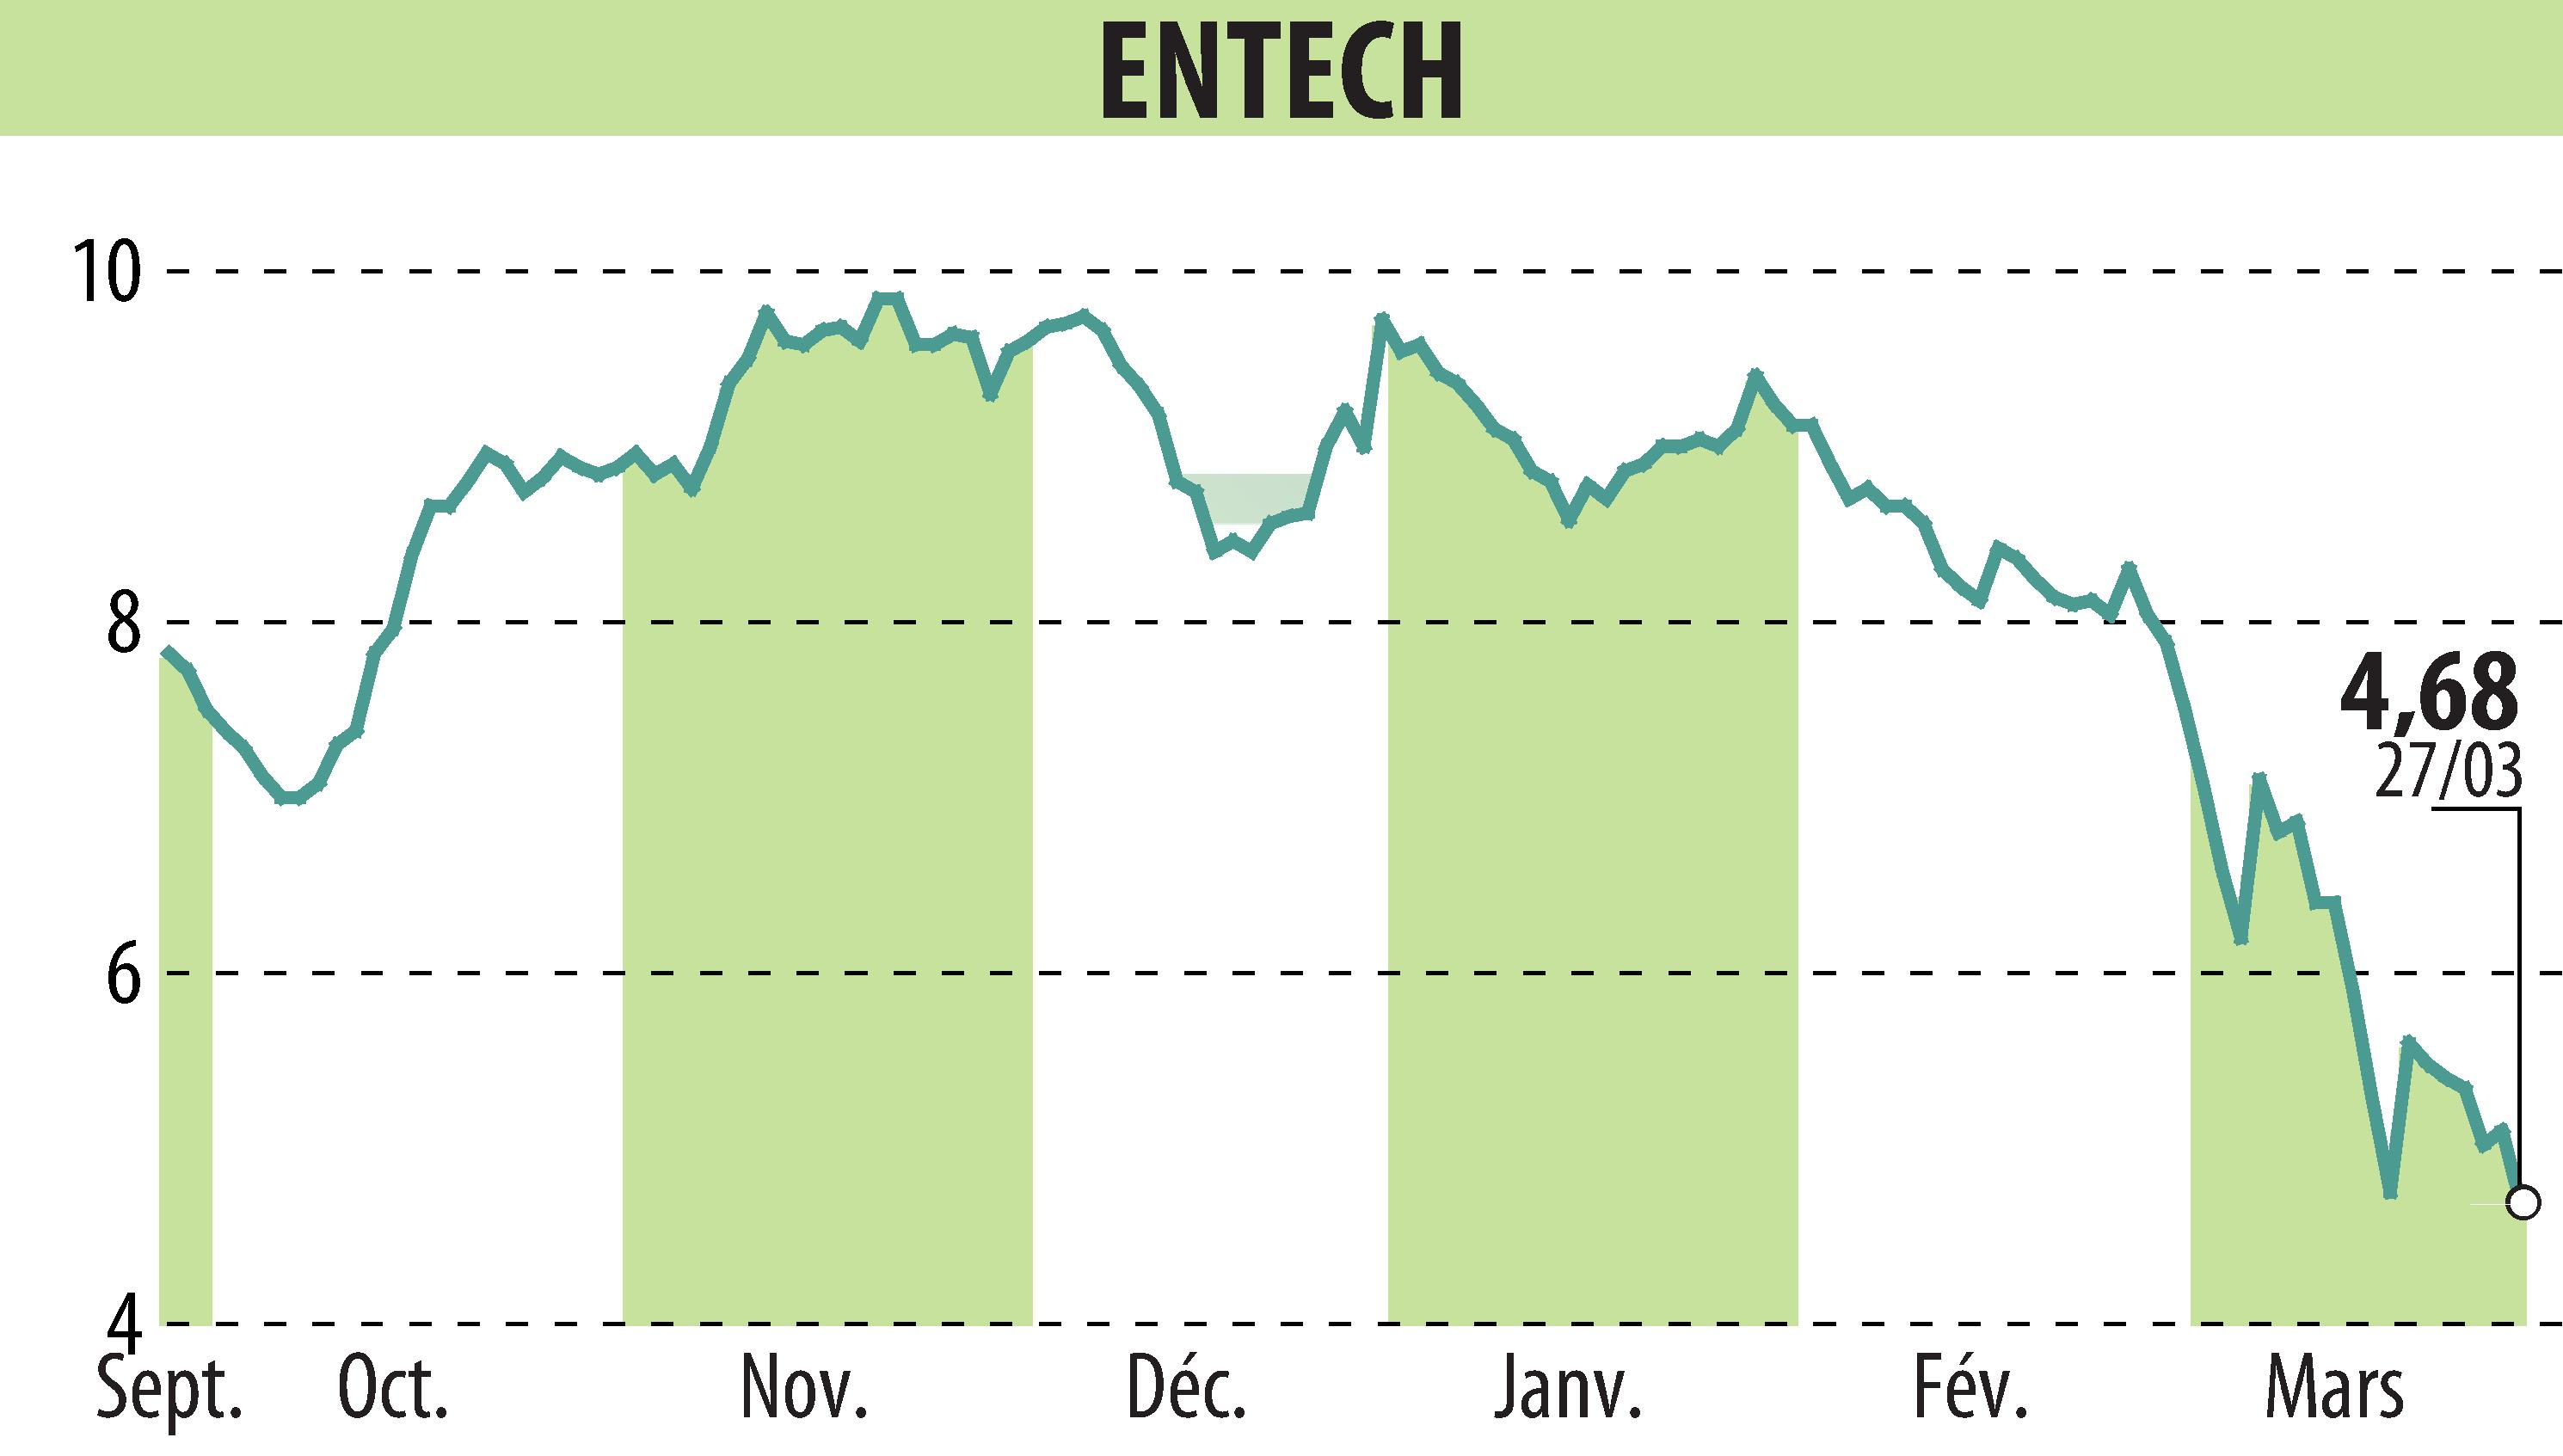 Stock price chart of ENTECH (EPA:ALESE) showing fluctuations.